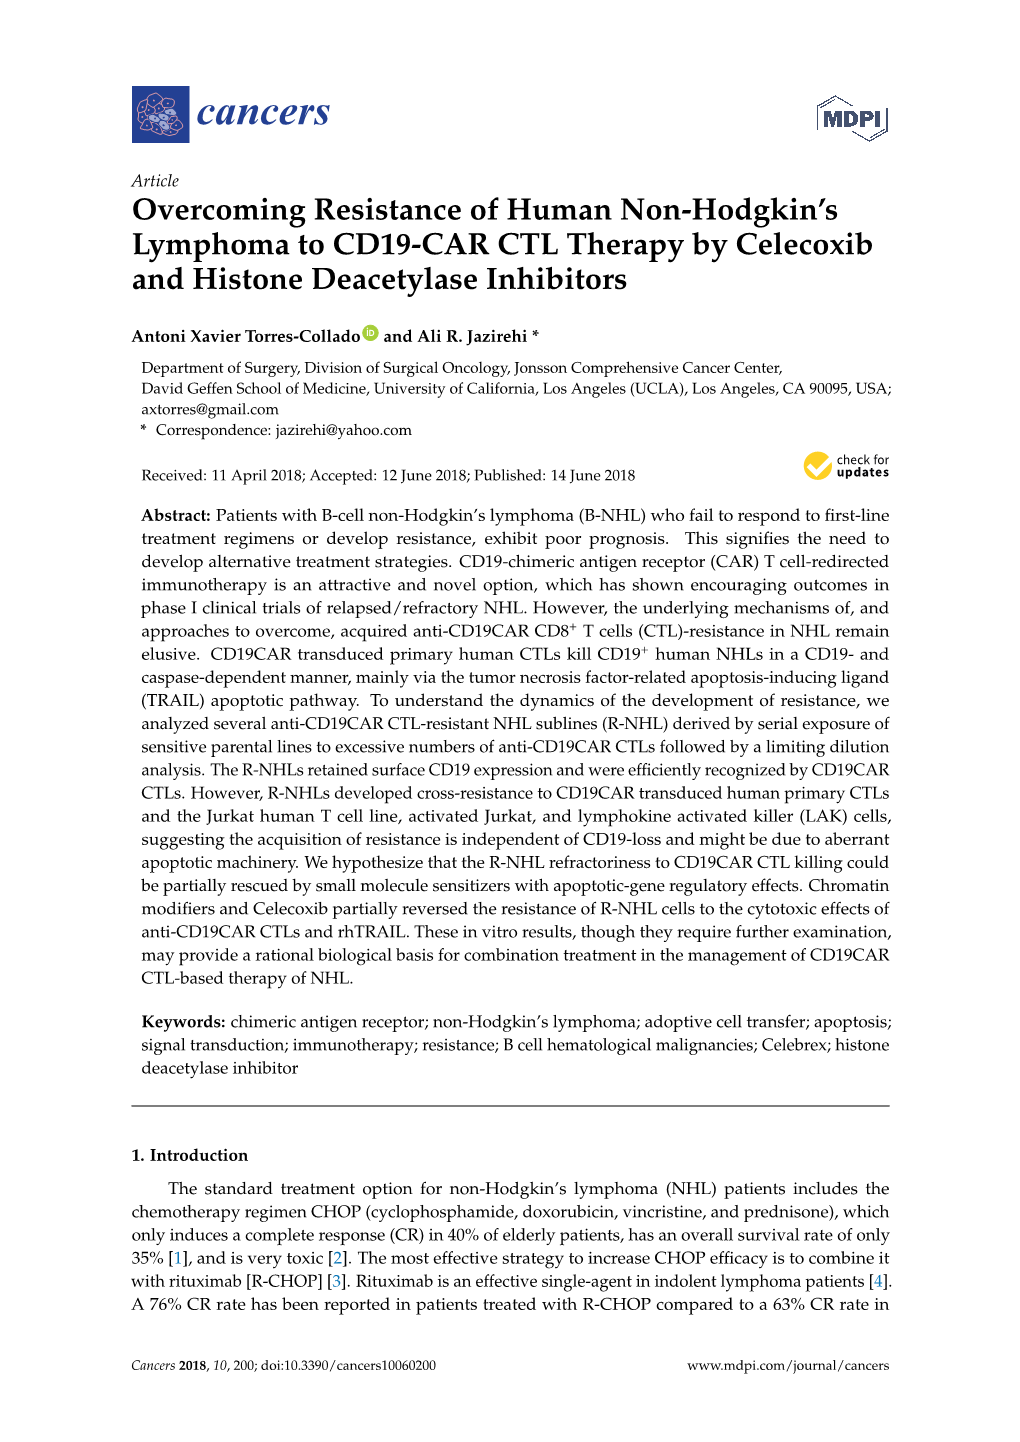 Overcoming Resistance of Human Non-Hodgkin's Lymphoma to CD19